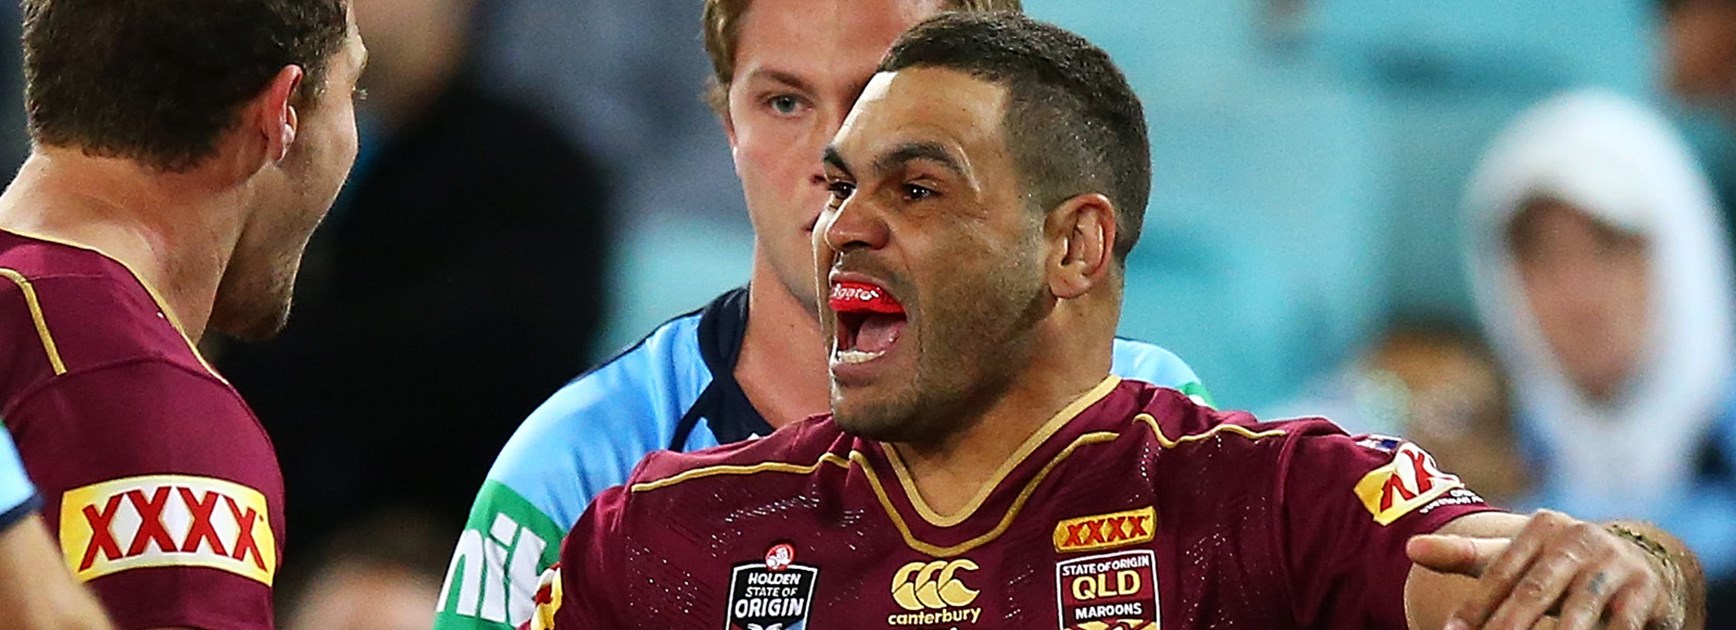 Greg Inglis celebrates his try against NSW in State of Origin at ANZ Stadium.